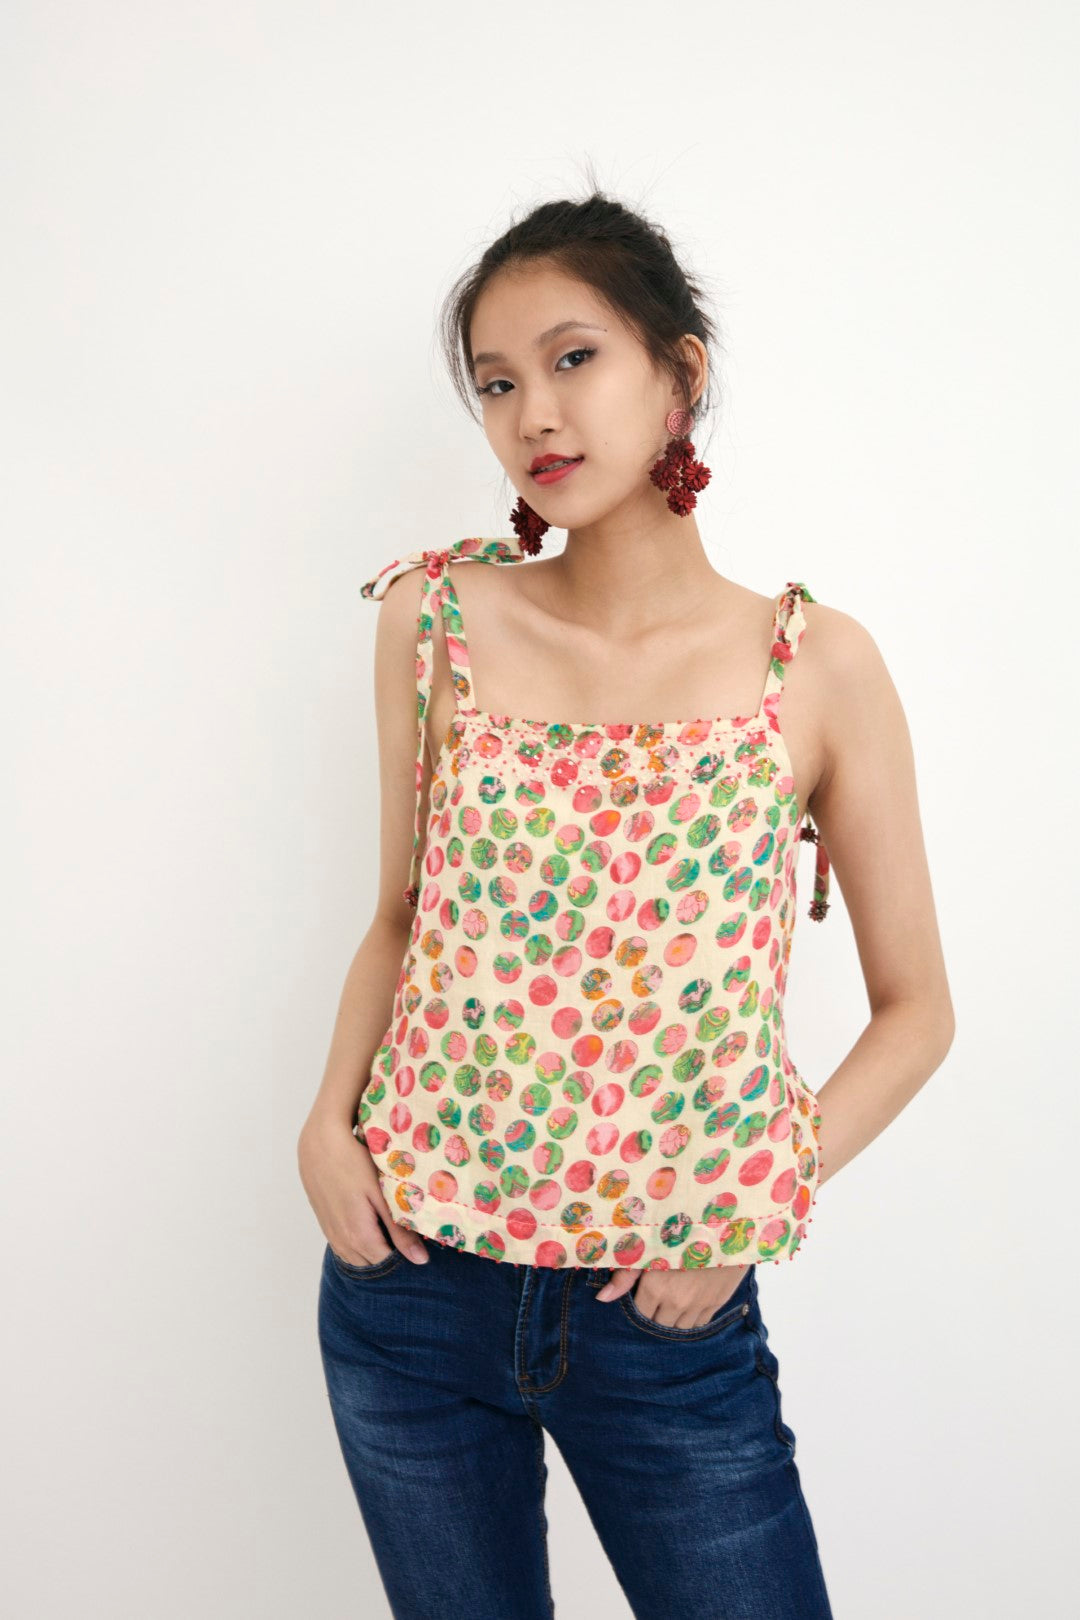 "Handwove cream hand-painted polka dot printed camisole in handwoven cotton silk, embellished with french knots and sequins. 100% Handwoven cotton silk; Lining: 100% cotton 100% Azo Free Dry Clean Only"